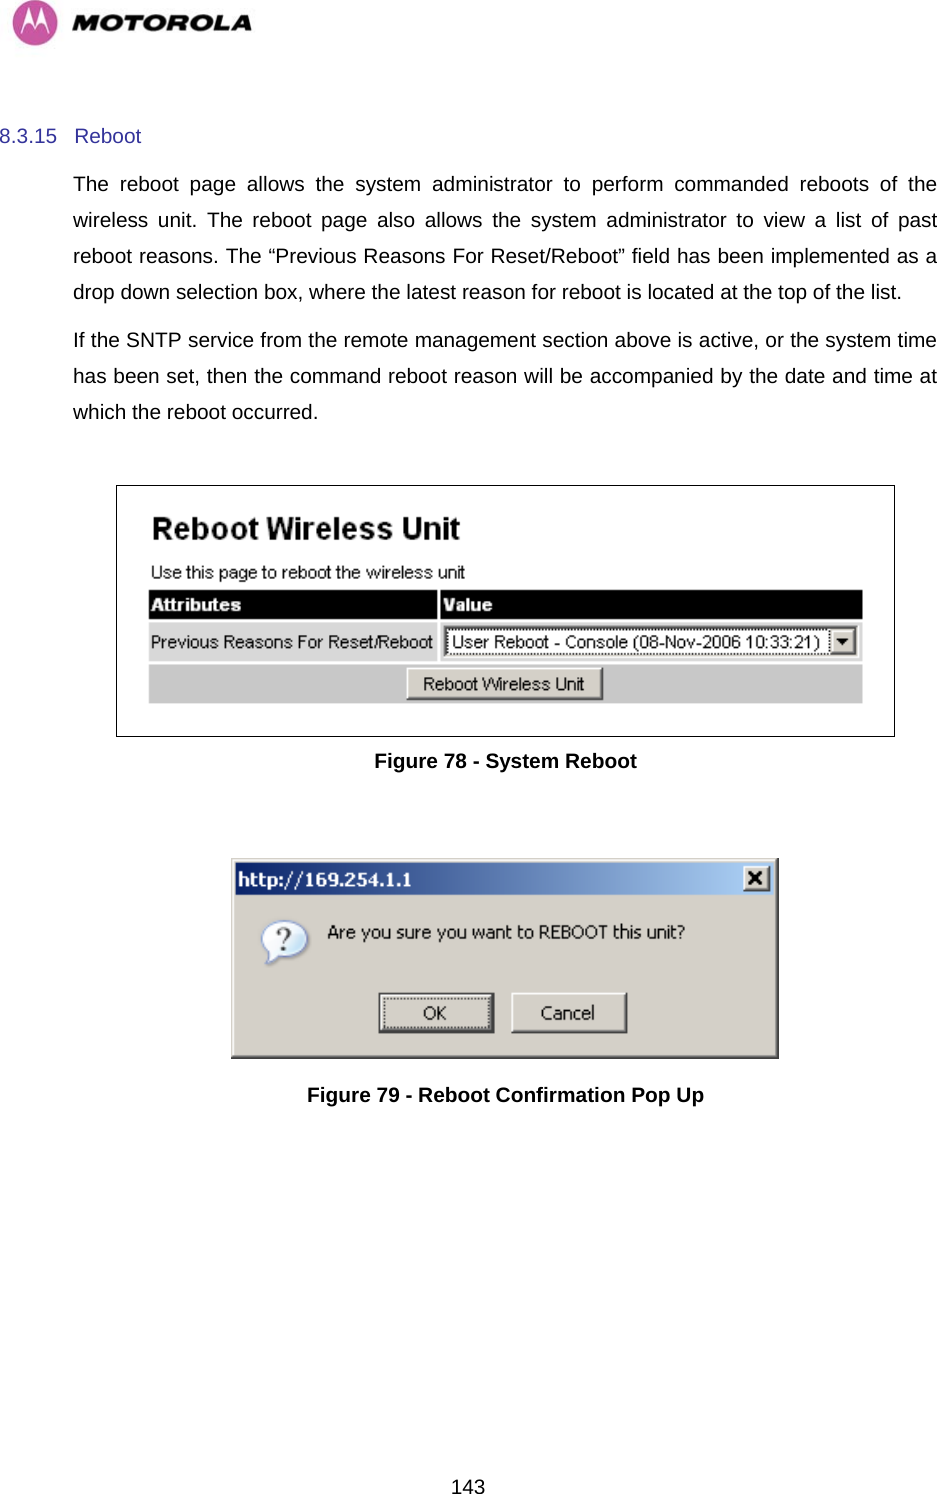   1438.3.15 Reboot  The reboot page allows the system administrator to perform commanded reboots of the wireless unit. The reboot page also allows the system administrator to view a list of past reboot reasons. The “Previous Reasons For Reset/Reboot” field has been implemented as a drop down selection box, where the latest reason for reboot is located at the top of the list. If the SNTP service from the remote management section above is active, or the system time has been set, then the command reboot reason will be accompanied by the date and time at which the reboot occurred.   Figure 78 - System Reboot   Figure 79 - Reboot Confirmation Pop Up 